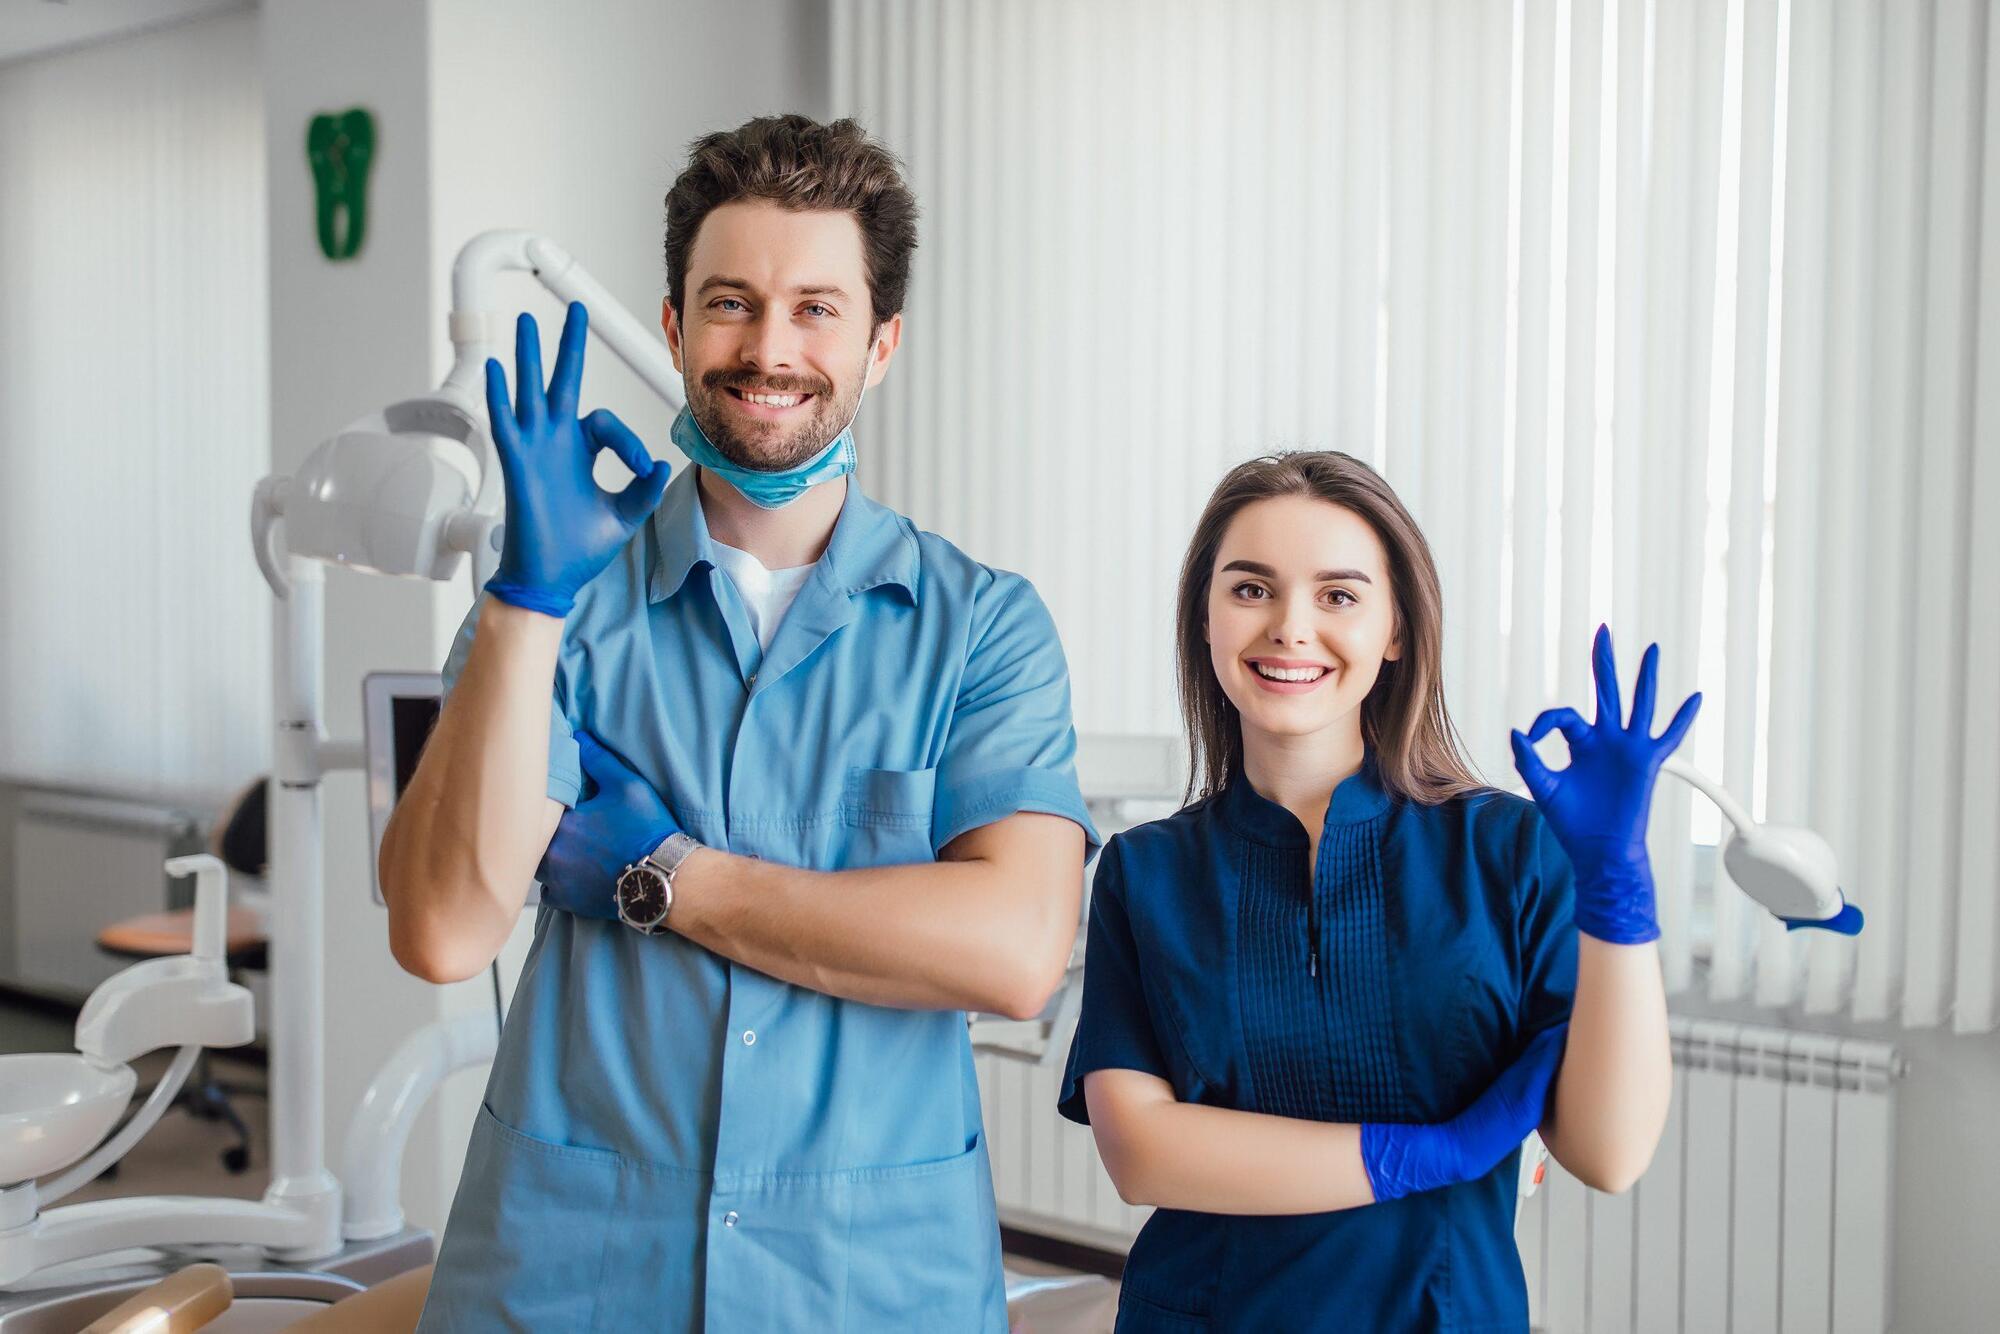 photo-smiling-dentist-standing-with-arms-crossed-with-her-colleague-showing-okay-sign-scaled